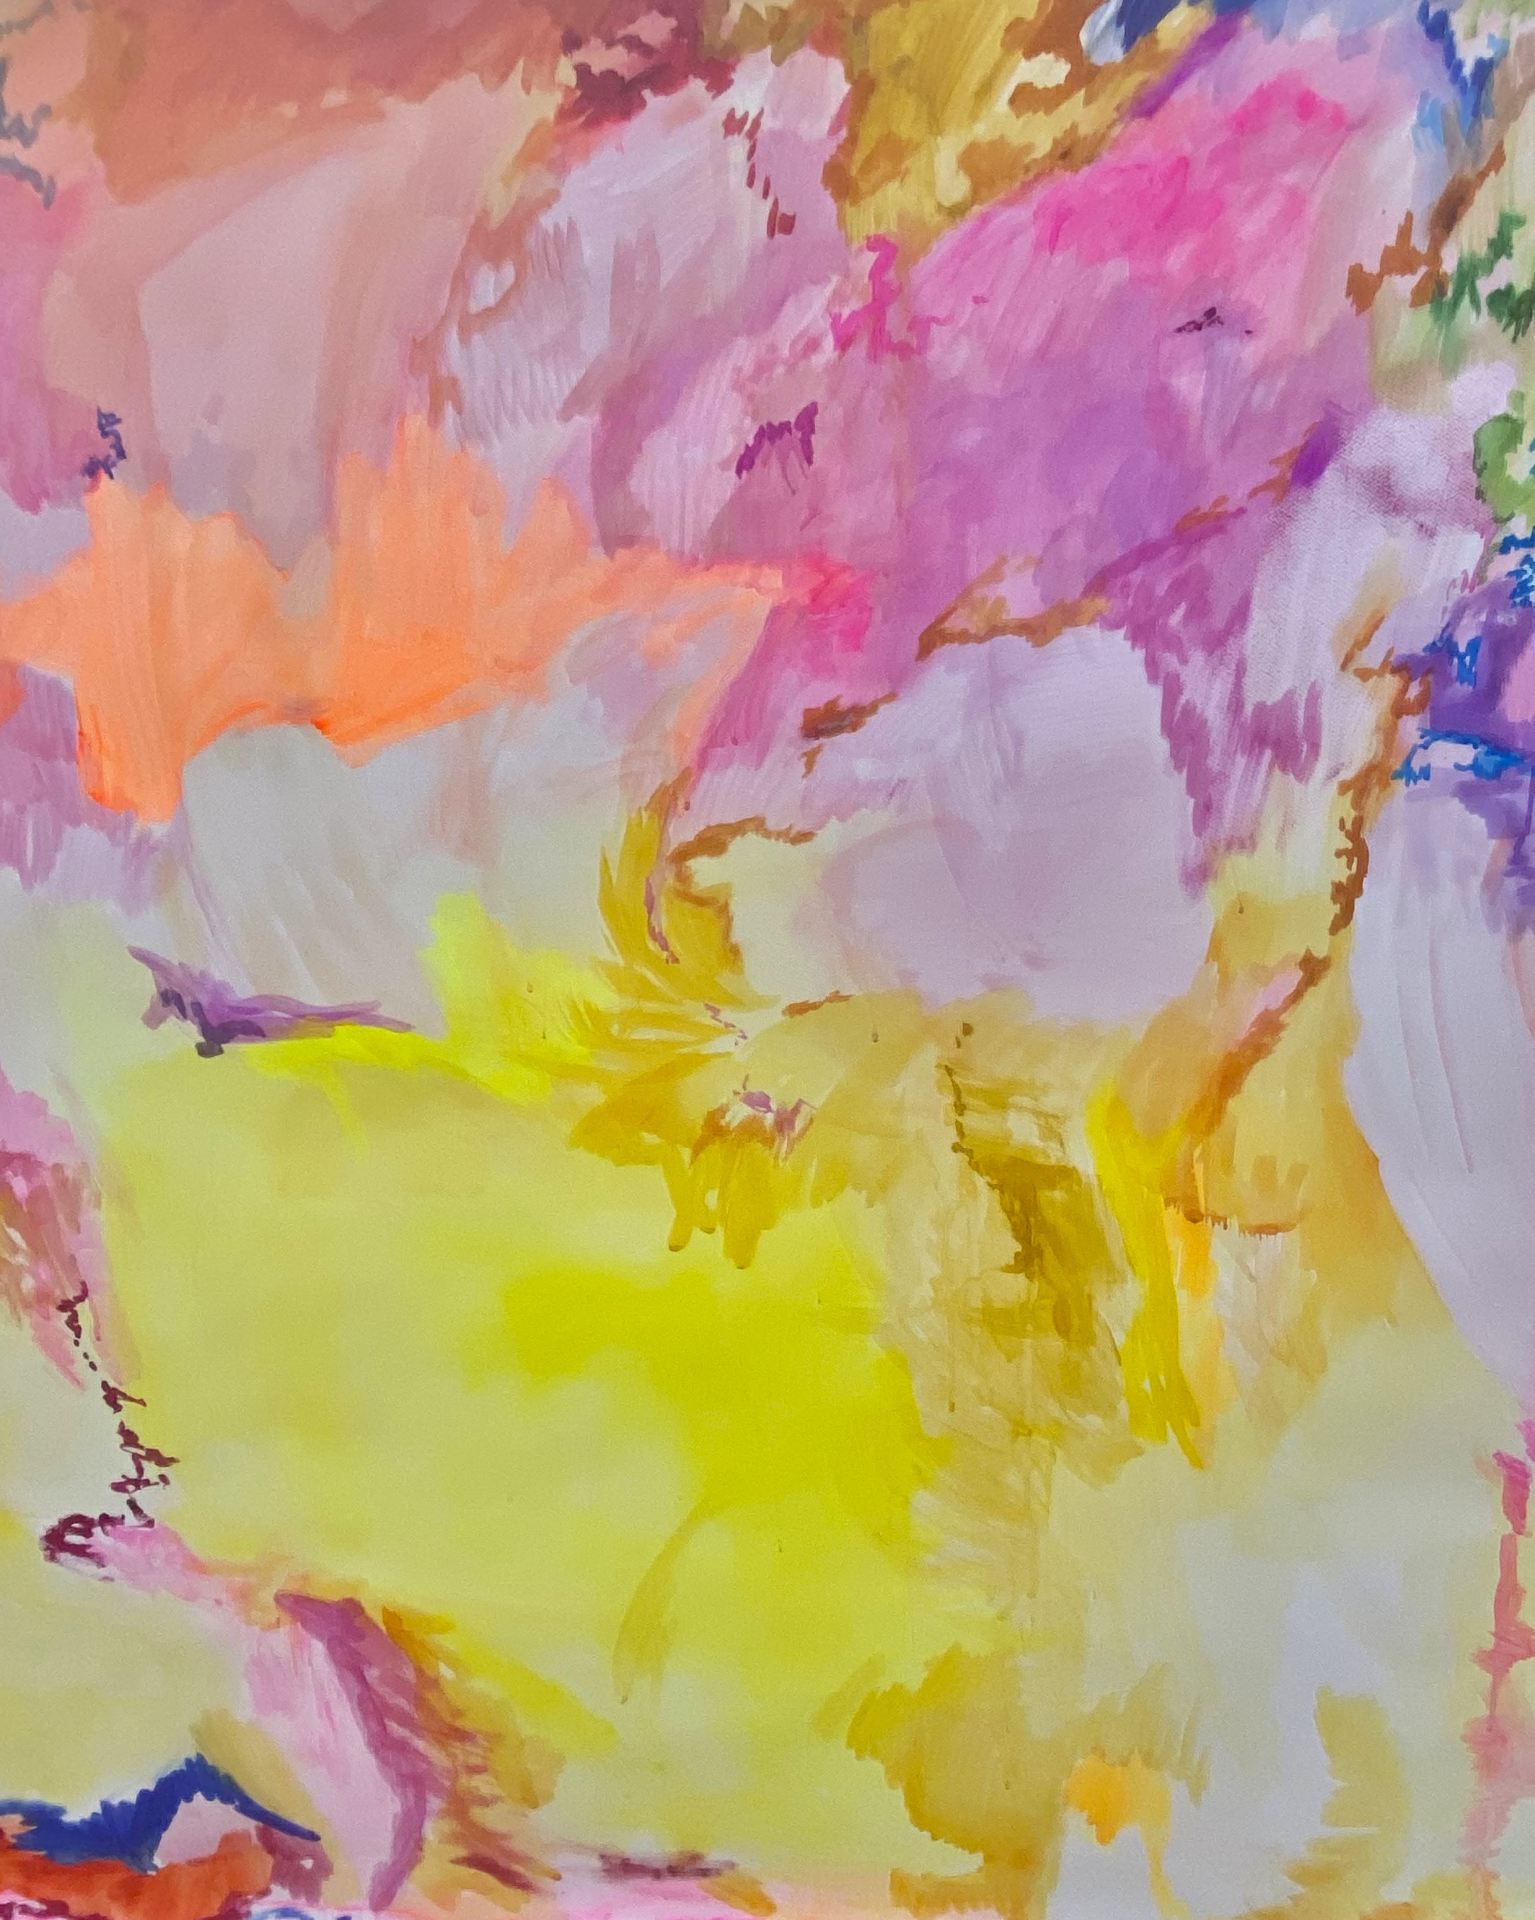 A colourful, abstract painting.